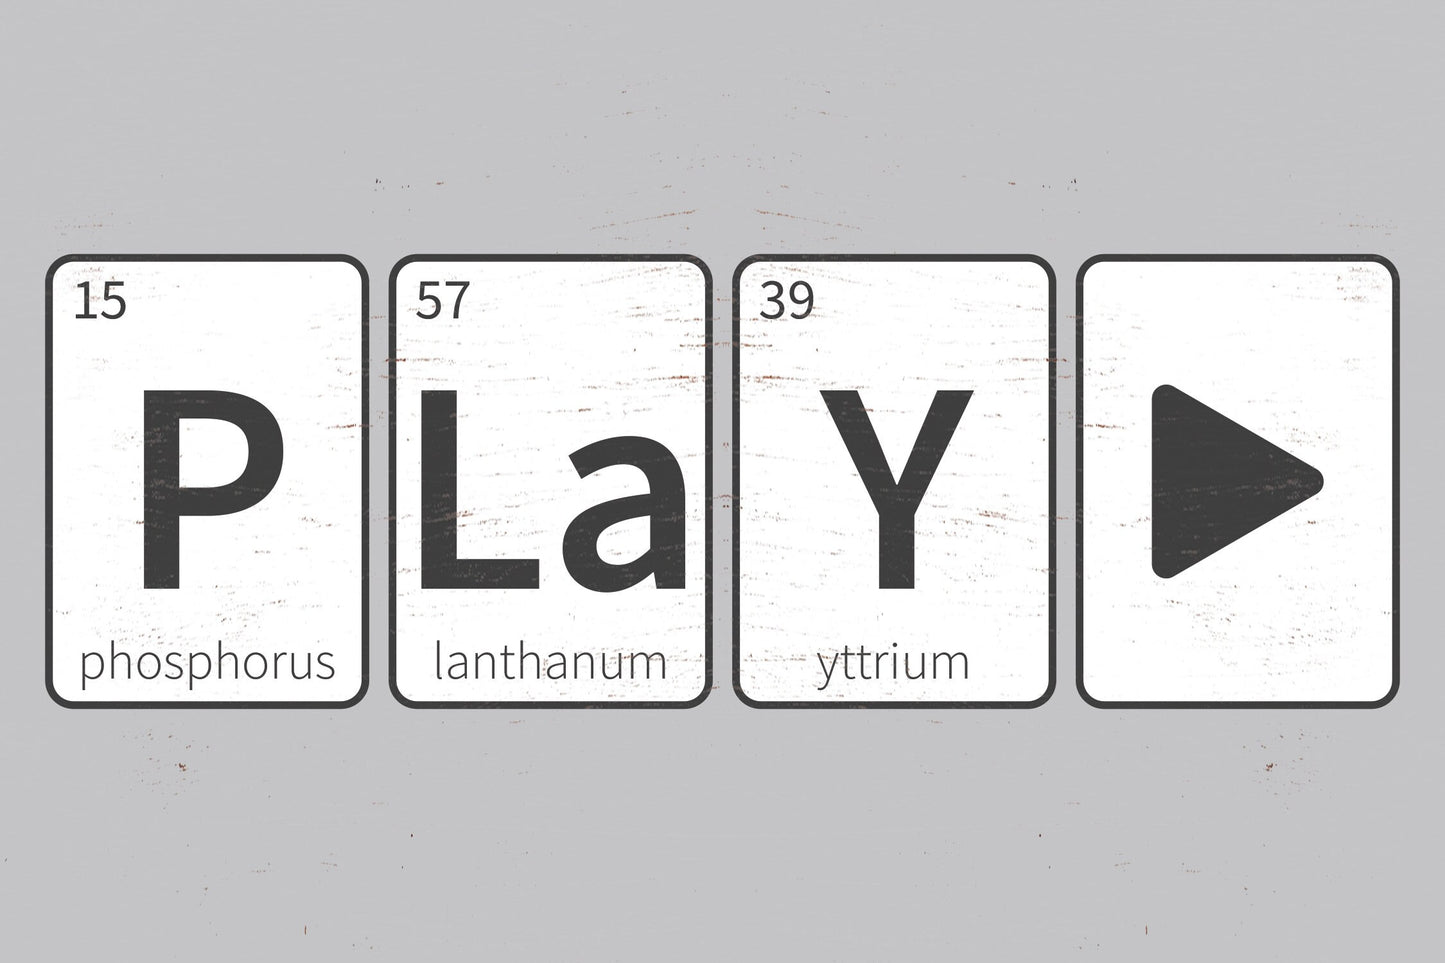 Geek Out with Chemistry: 7.5in x 5in Wooden Wall Decor Sign - "PLaYEr" Periodic Table Elements Words Chemistry Poster - Creative & Fun